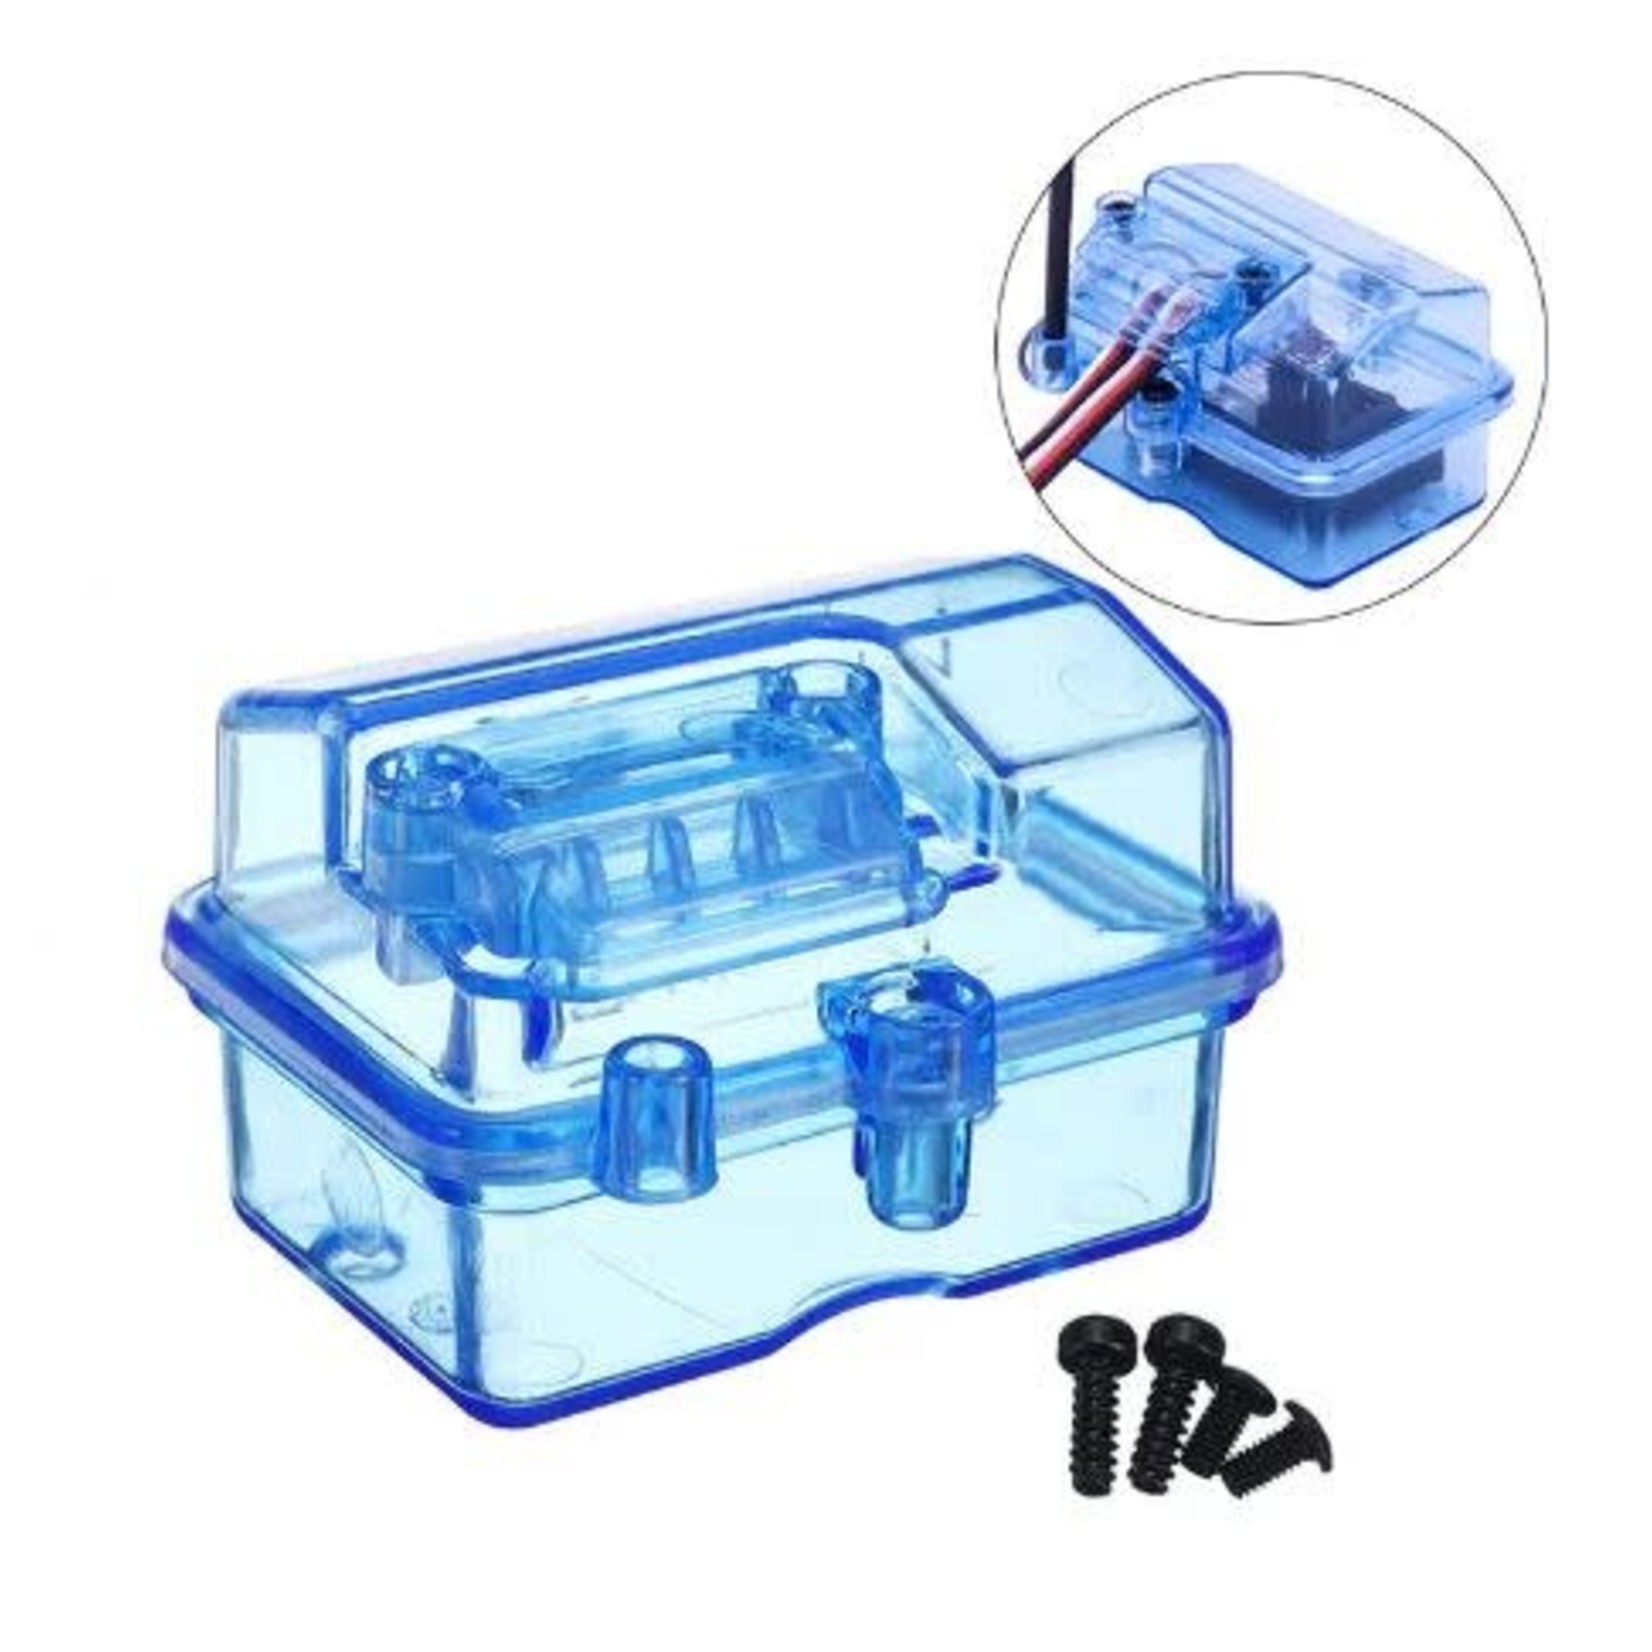 INTEGY Clear Plastic Waterproof Receiver Box for RC Boat C30028 - AZ Turn  and Burn RC